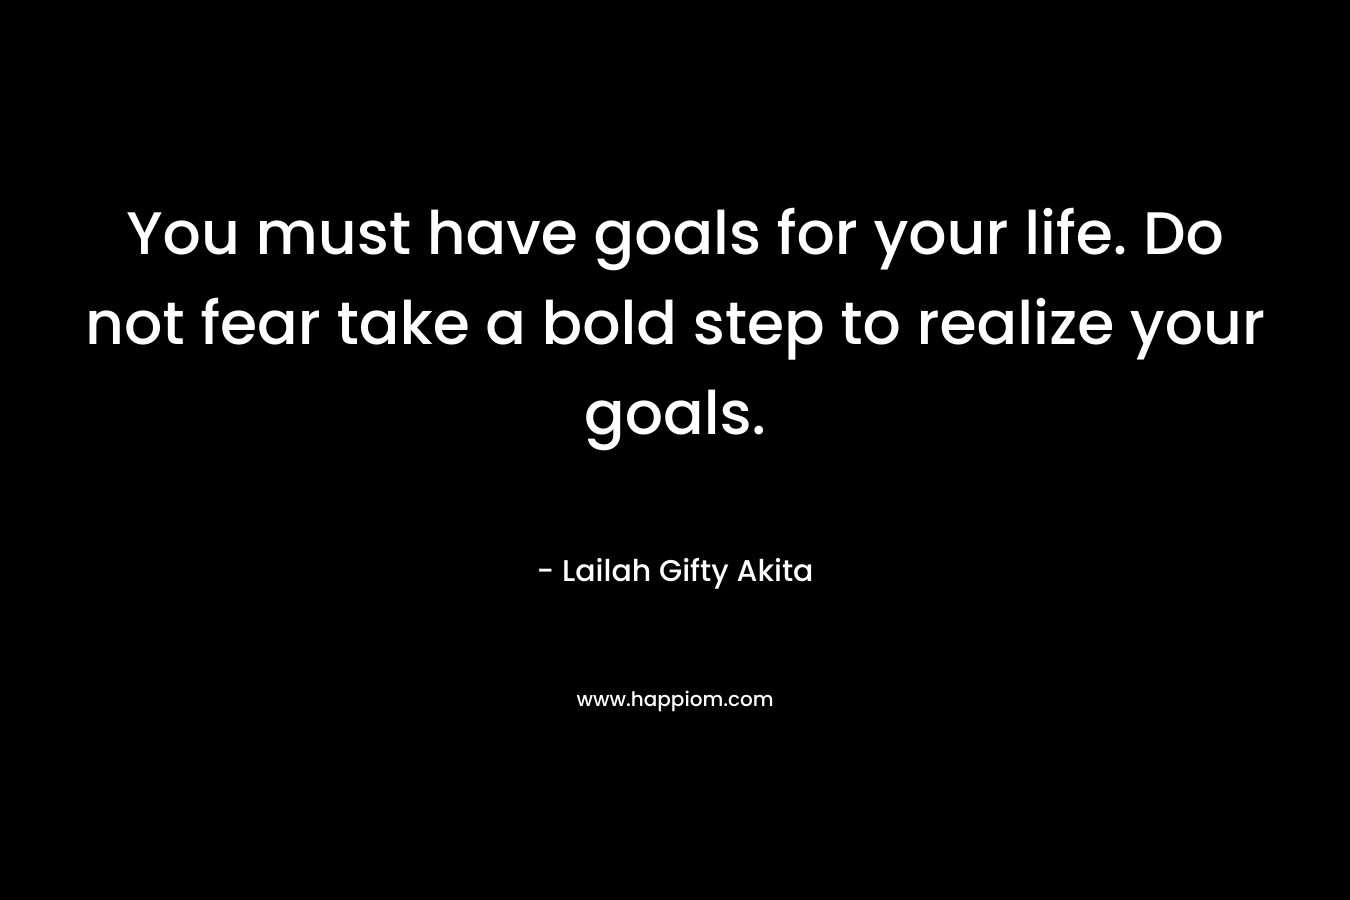 You must have goals for your life. Do not fear take a bold step to realize your goals.